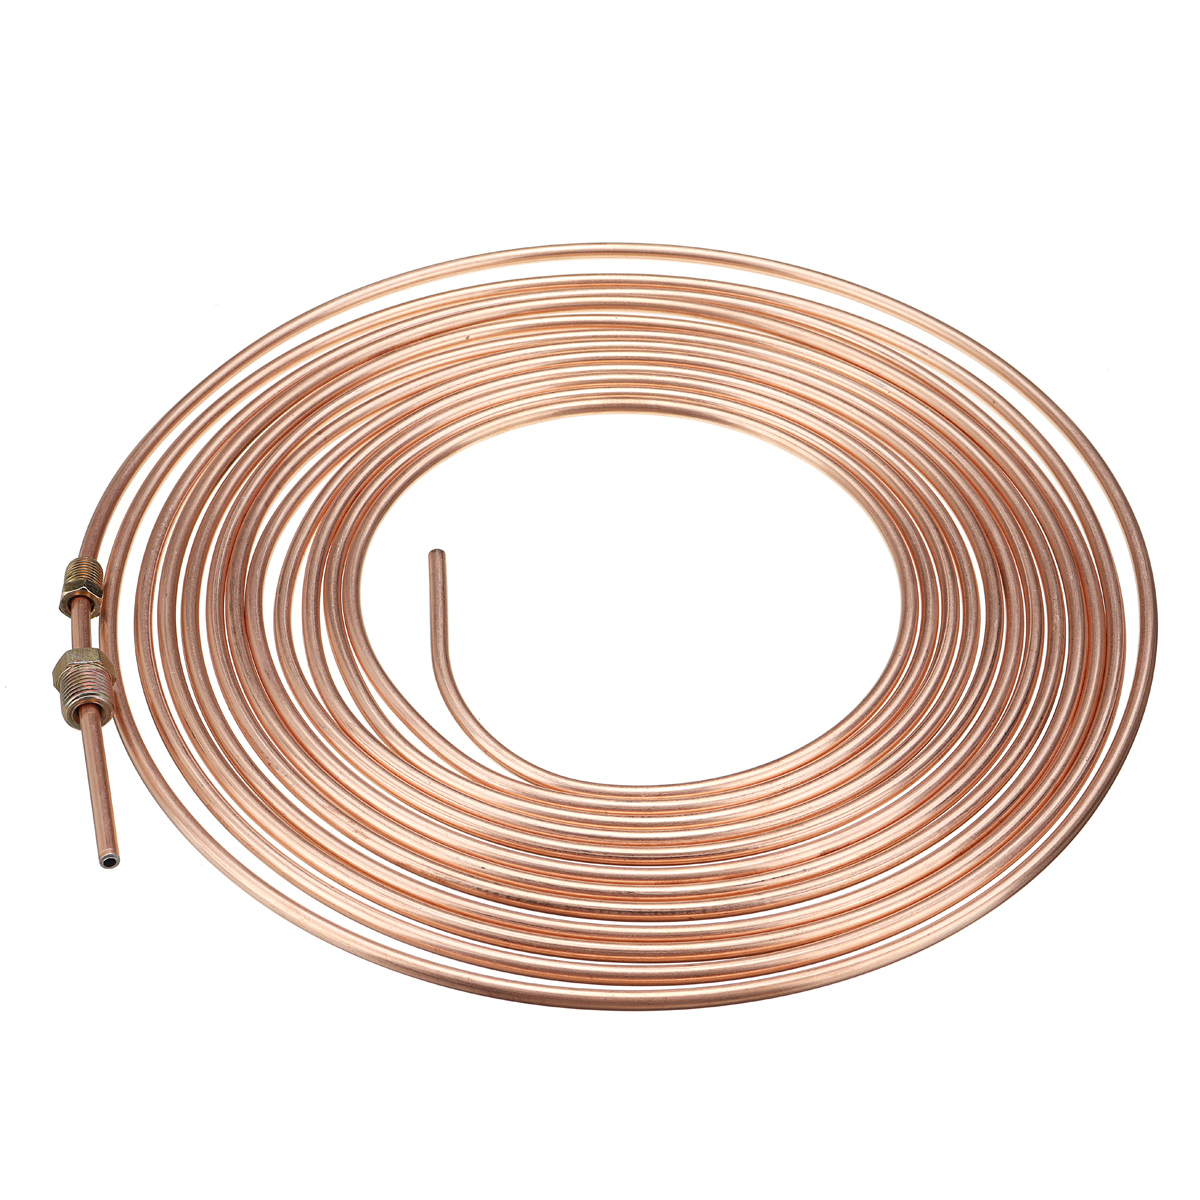 Universal-25Ft-Copper-Nickel-Brake-Line-Tubing-Kit-316quot-OD-with-15Pcs-Nuts-1586631-6